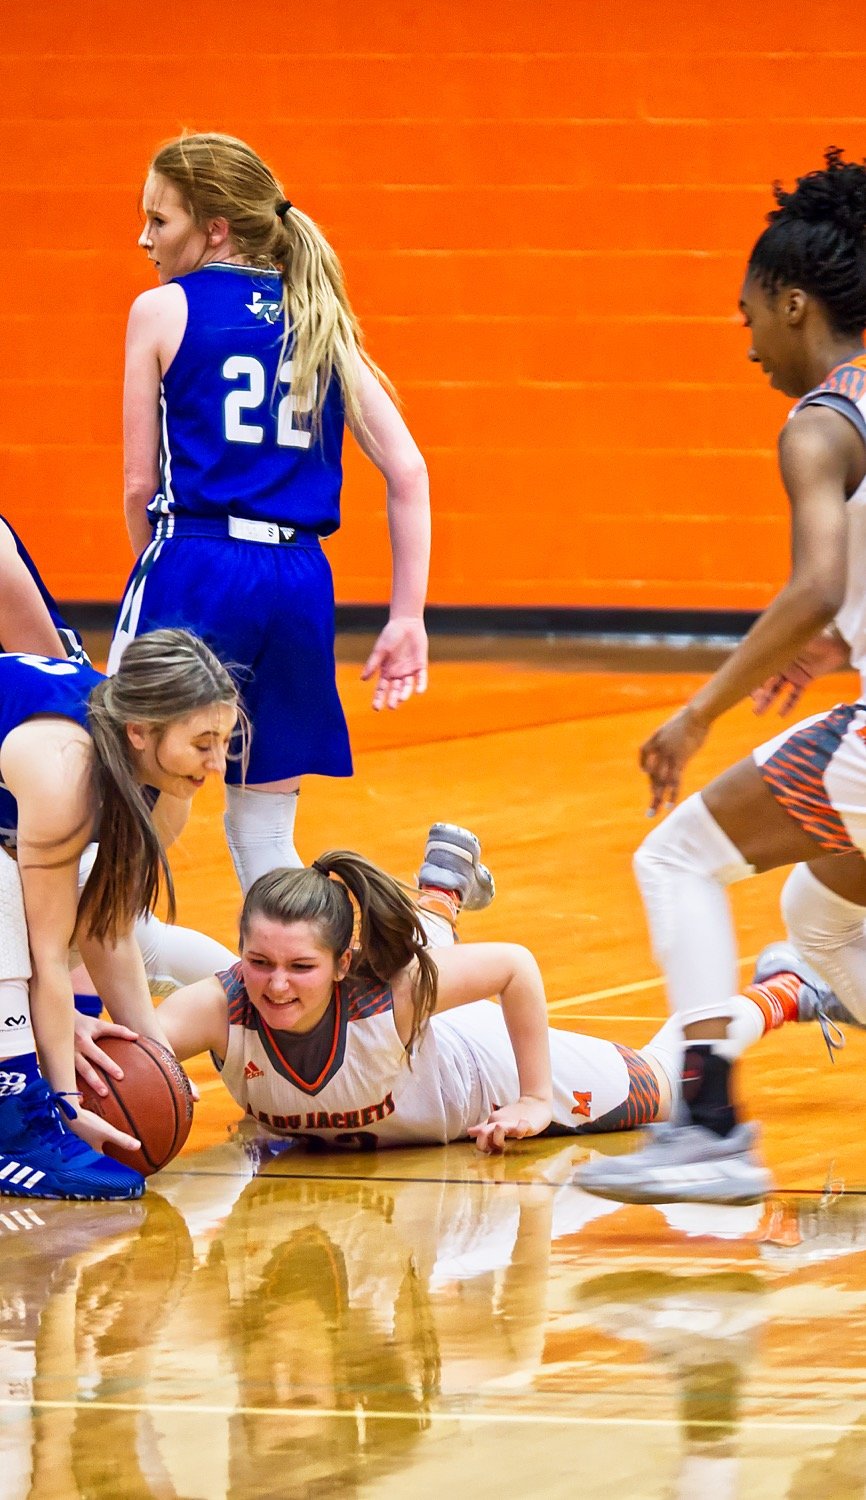 Cyndi Butler gets on the ground to track down a loose ball.